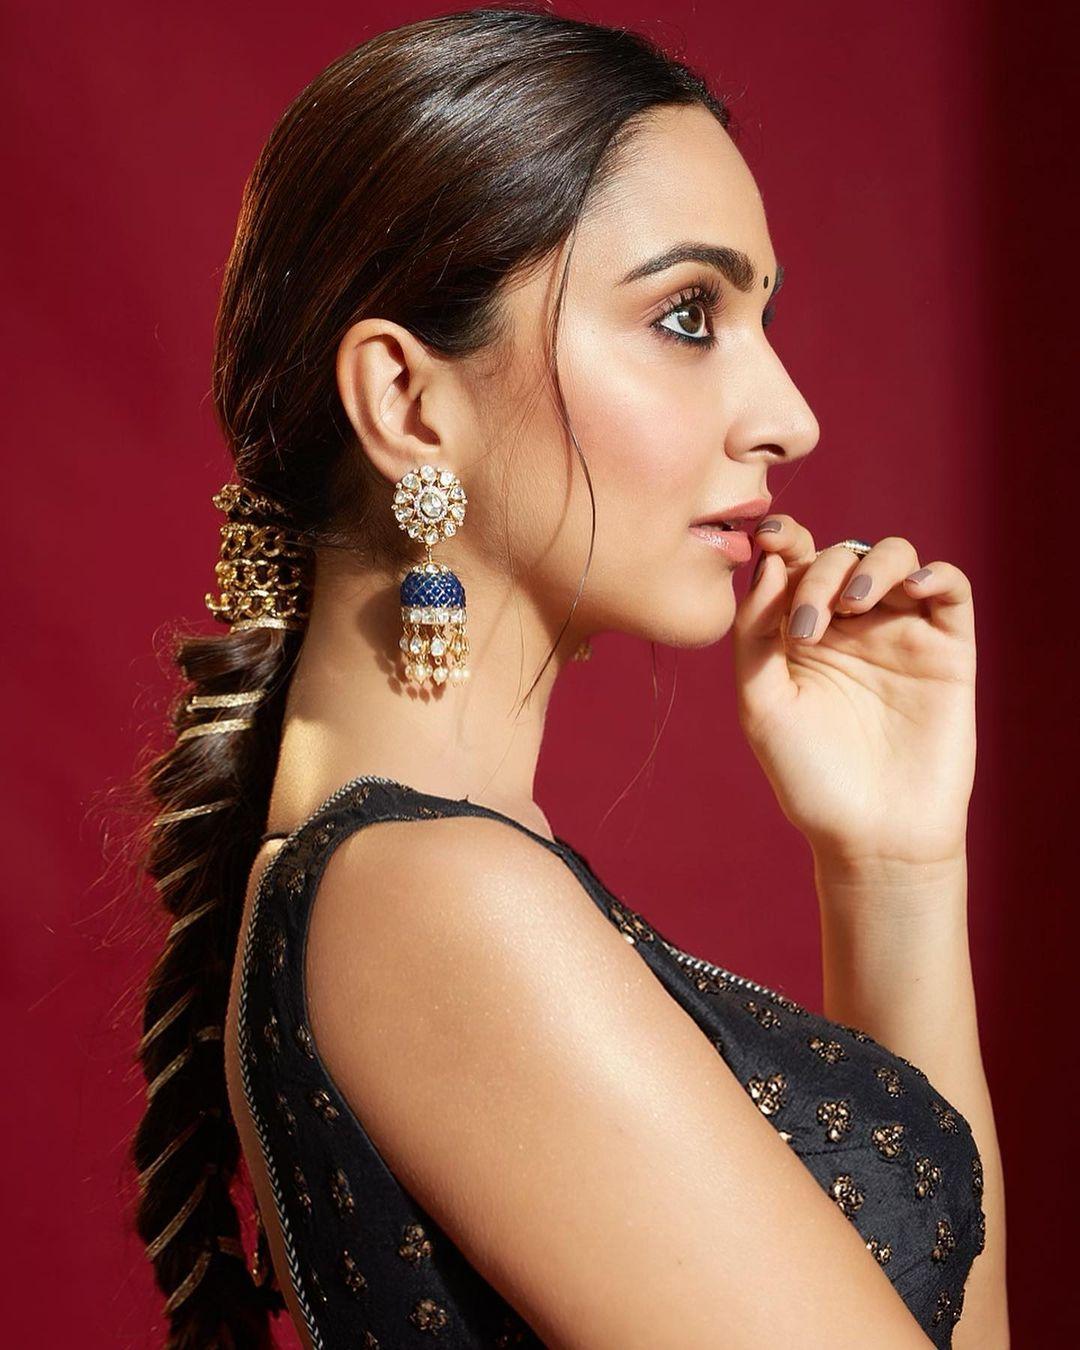 Bollywood actress hot photos kiara advani looking very glamorous and sexy photoshoot photos hd images pictures stills first look posters of bollywood actress hot photos kiara advani looking very glamorous